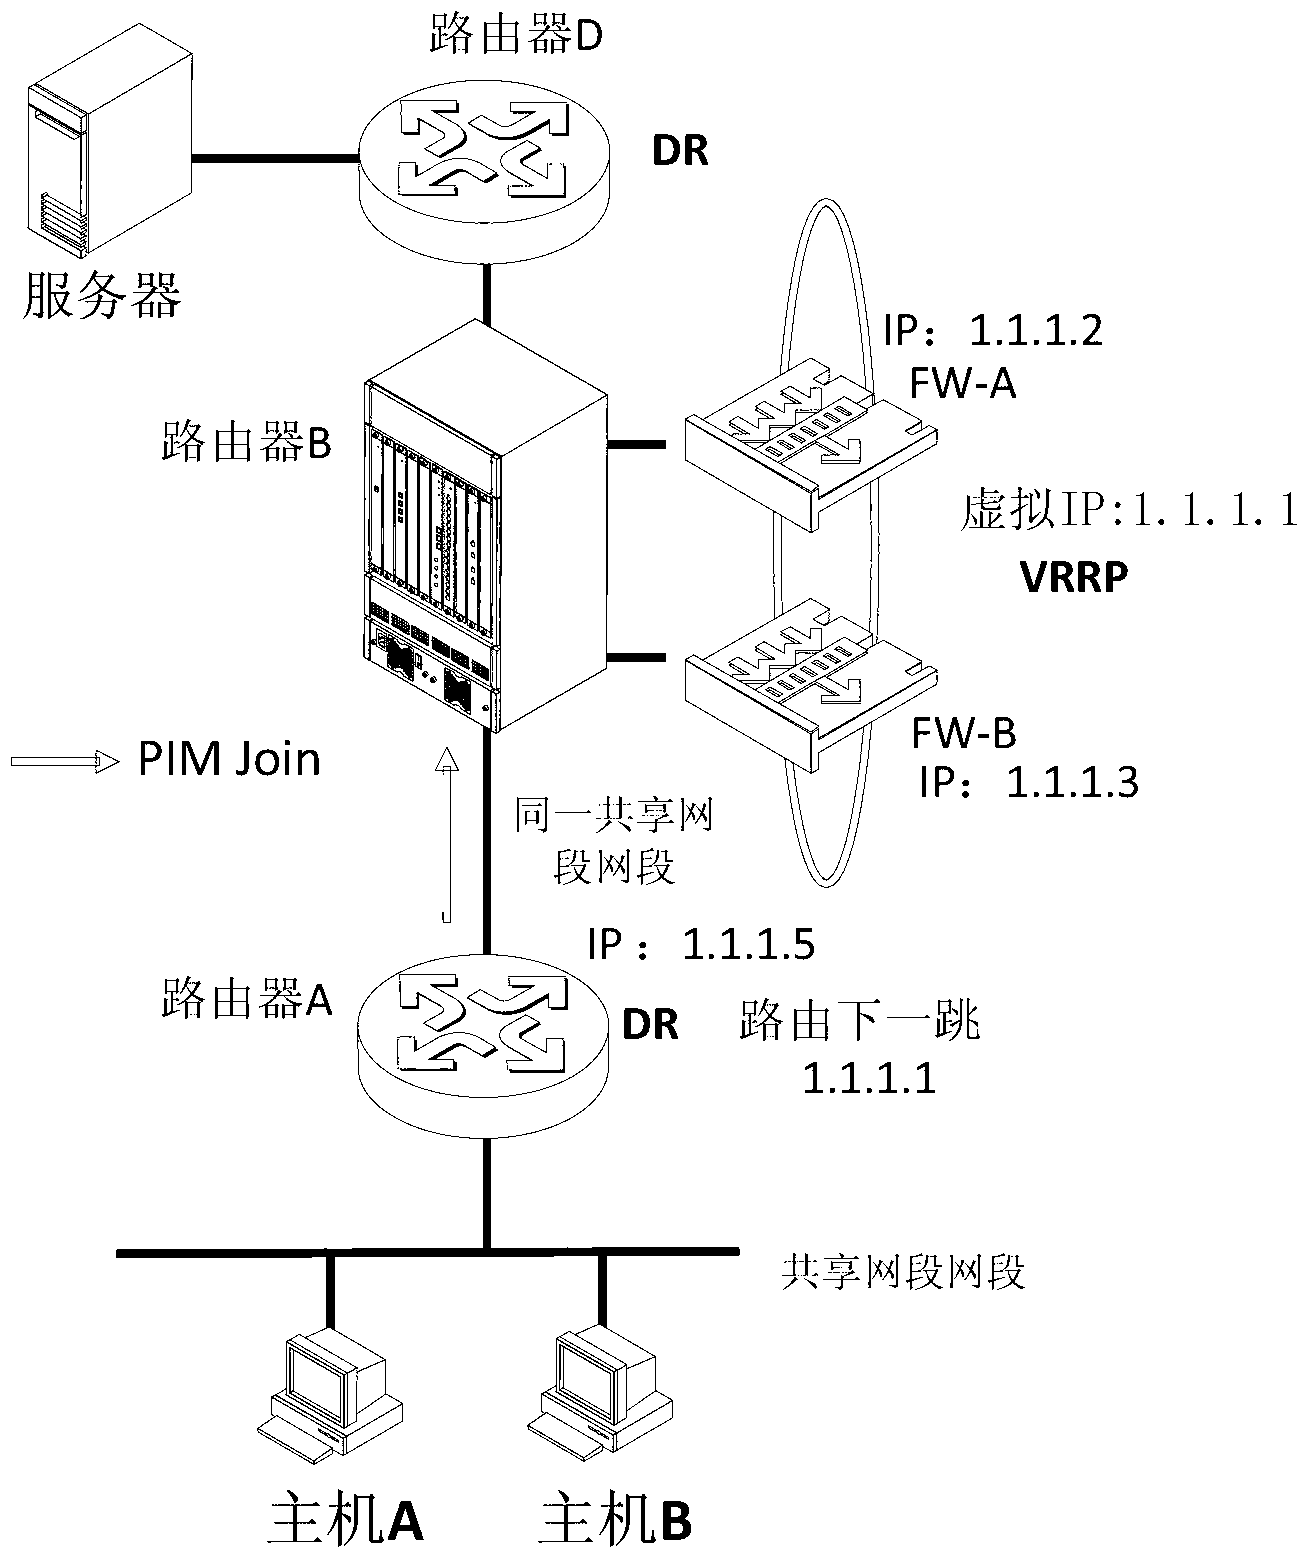 Method and device for realizing PIM multicast in VRRP network environment